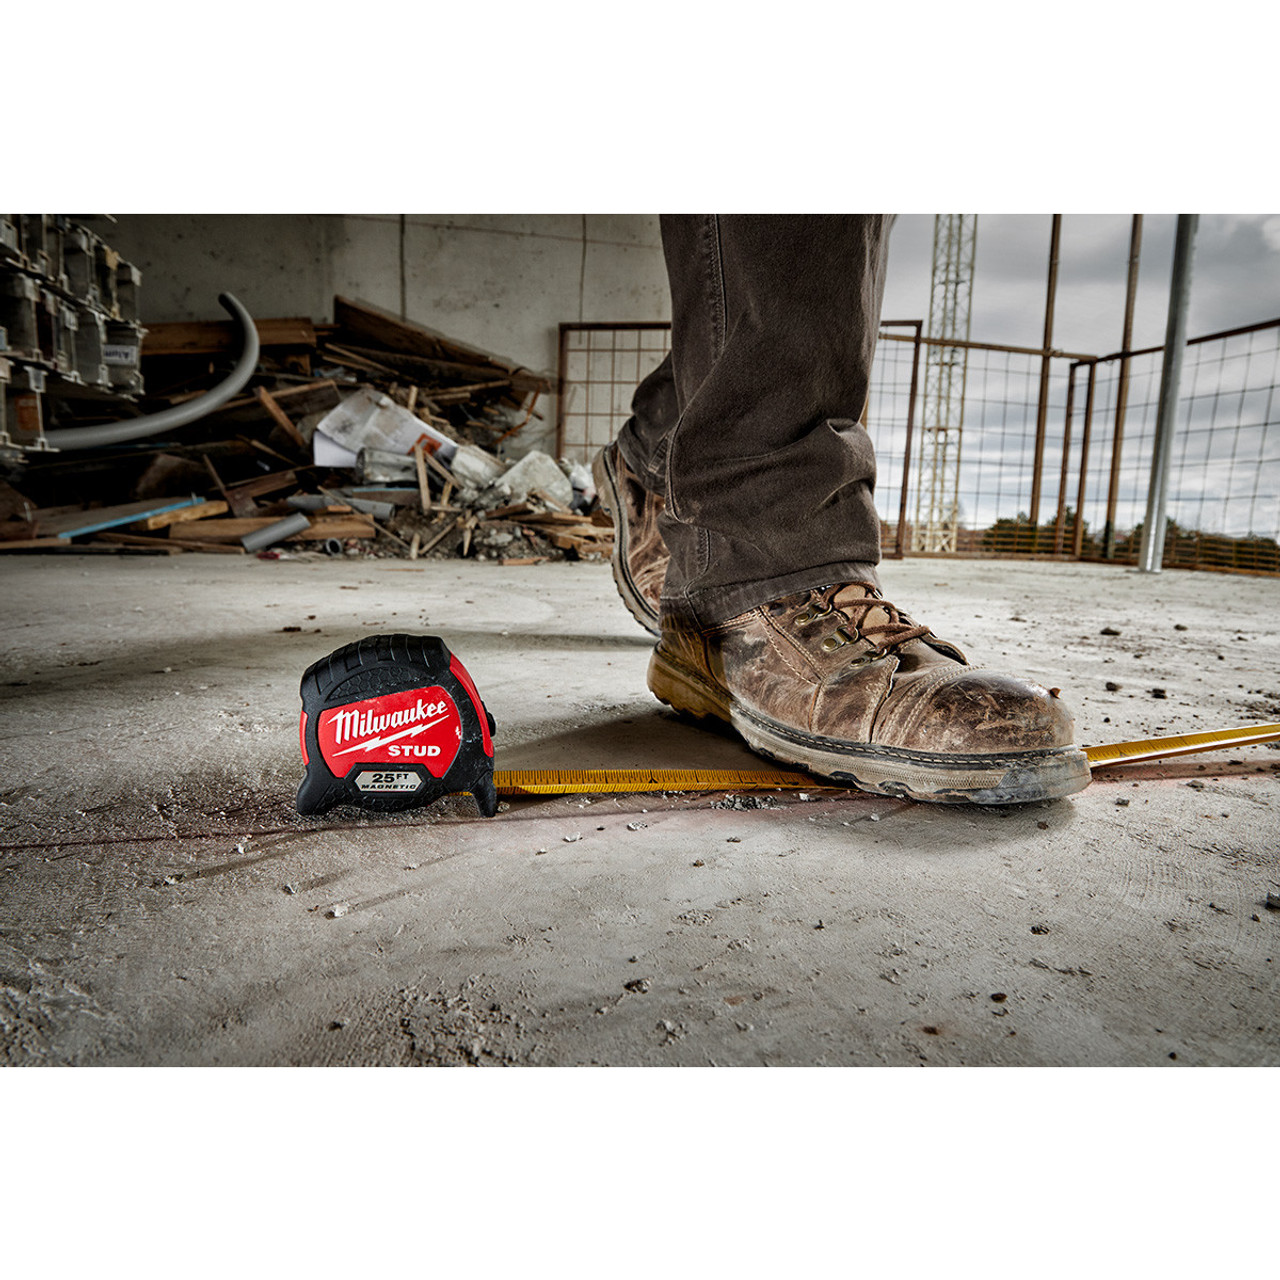 Reviews for Milwaukee 25 ft. x 1-5/16 in. Wide Blade Magnetic Tape Measure  with 17 ft. Reach